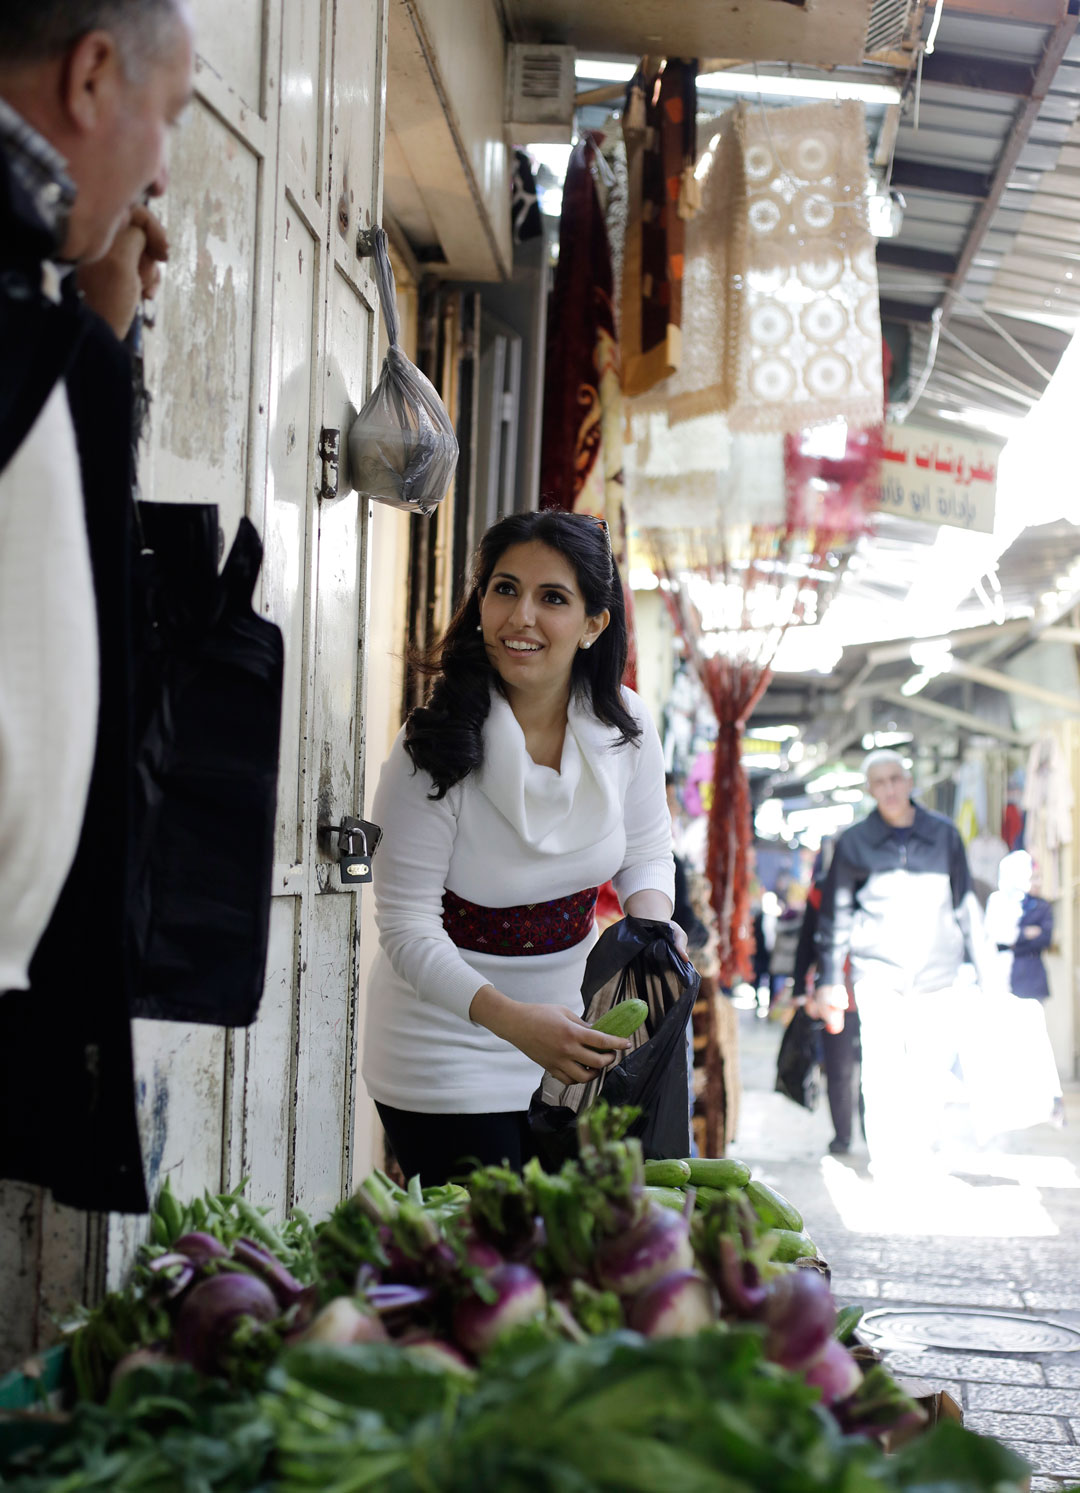 The Palestinian Table's author Reem Kassis